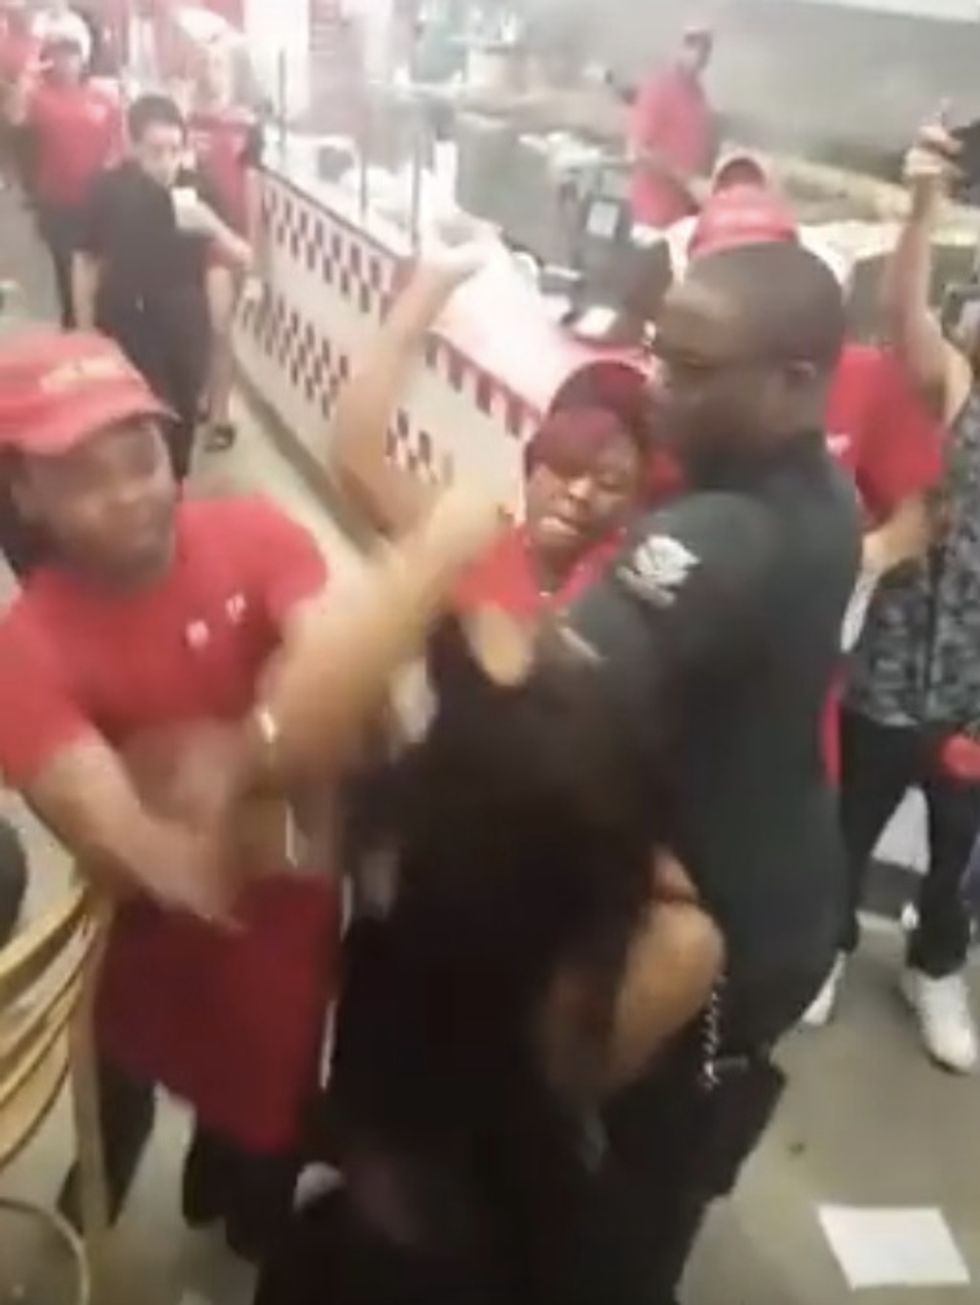 After Video Blows Up of Burger Chain Workers Beating a Woman, Five Guys Rep Calls Brawl 'Simply Unacceptable